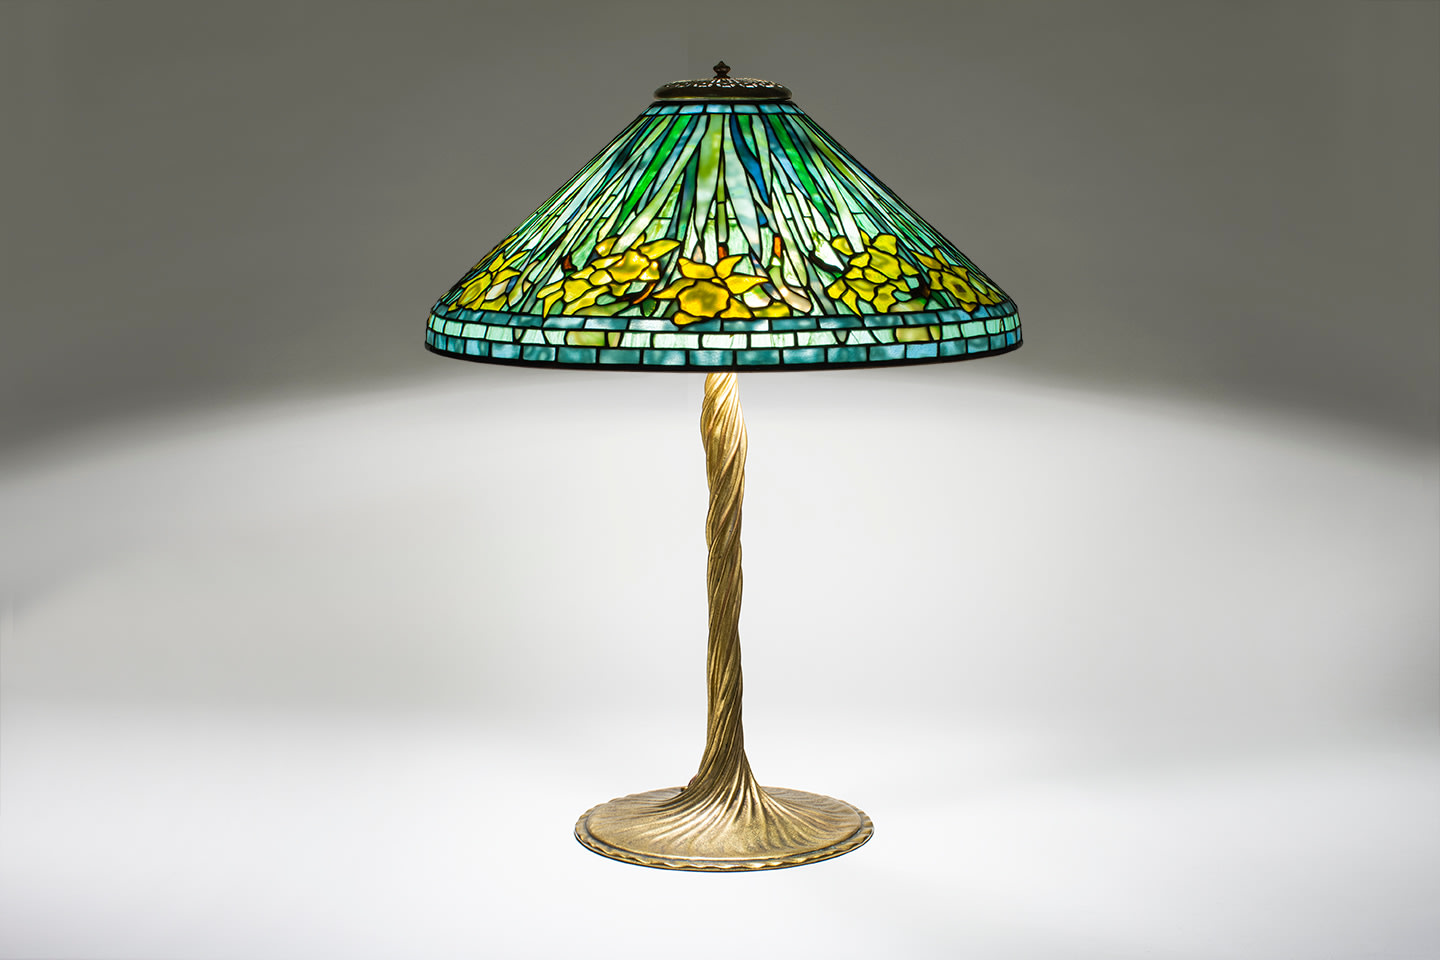 an original tiffany lamp with a leaded glass shade depicting yellow daffodils against spiky green leaves and a blue background, on a gilt bronze base which is a sculptural representation of a twisted vine